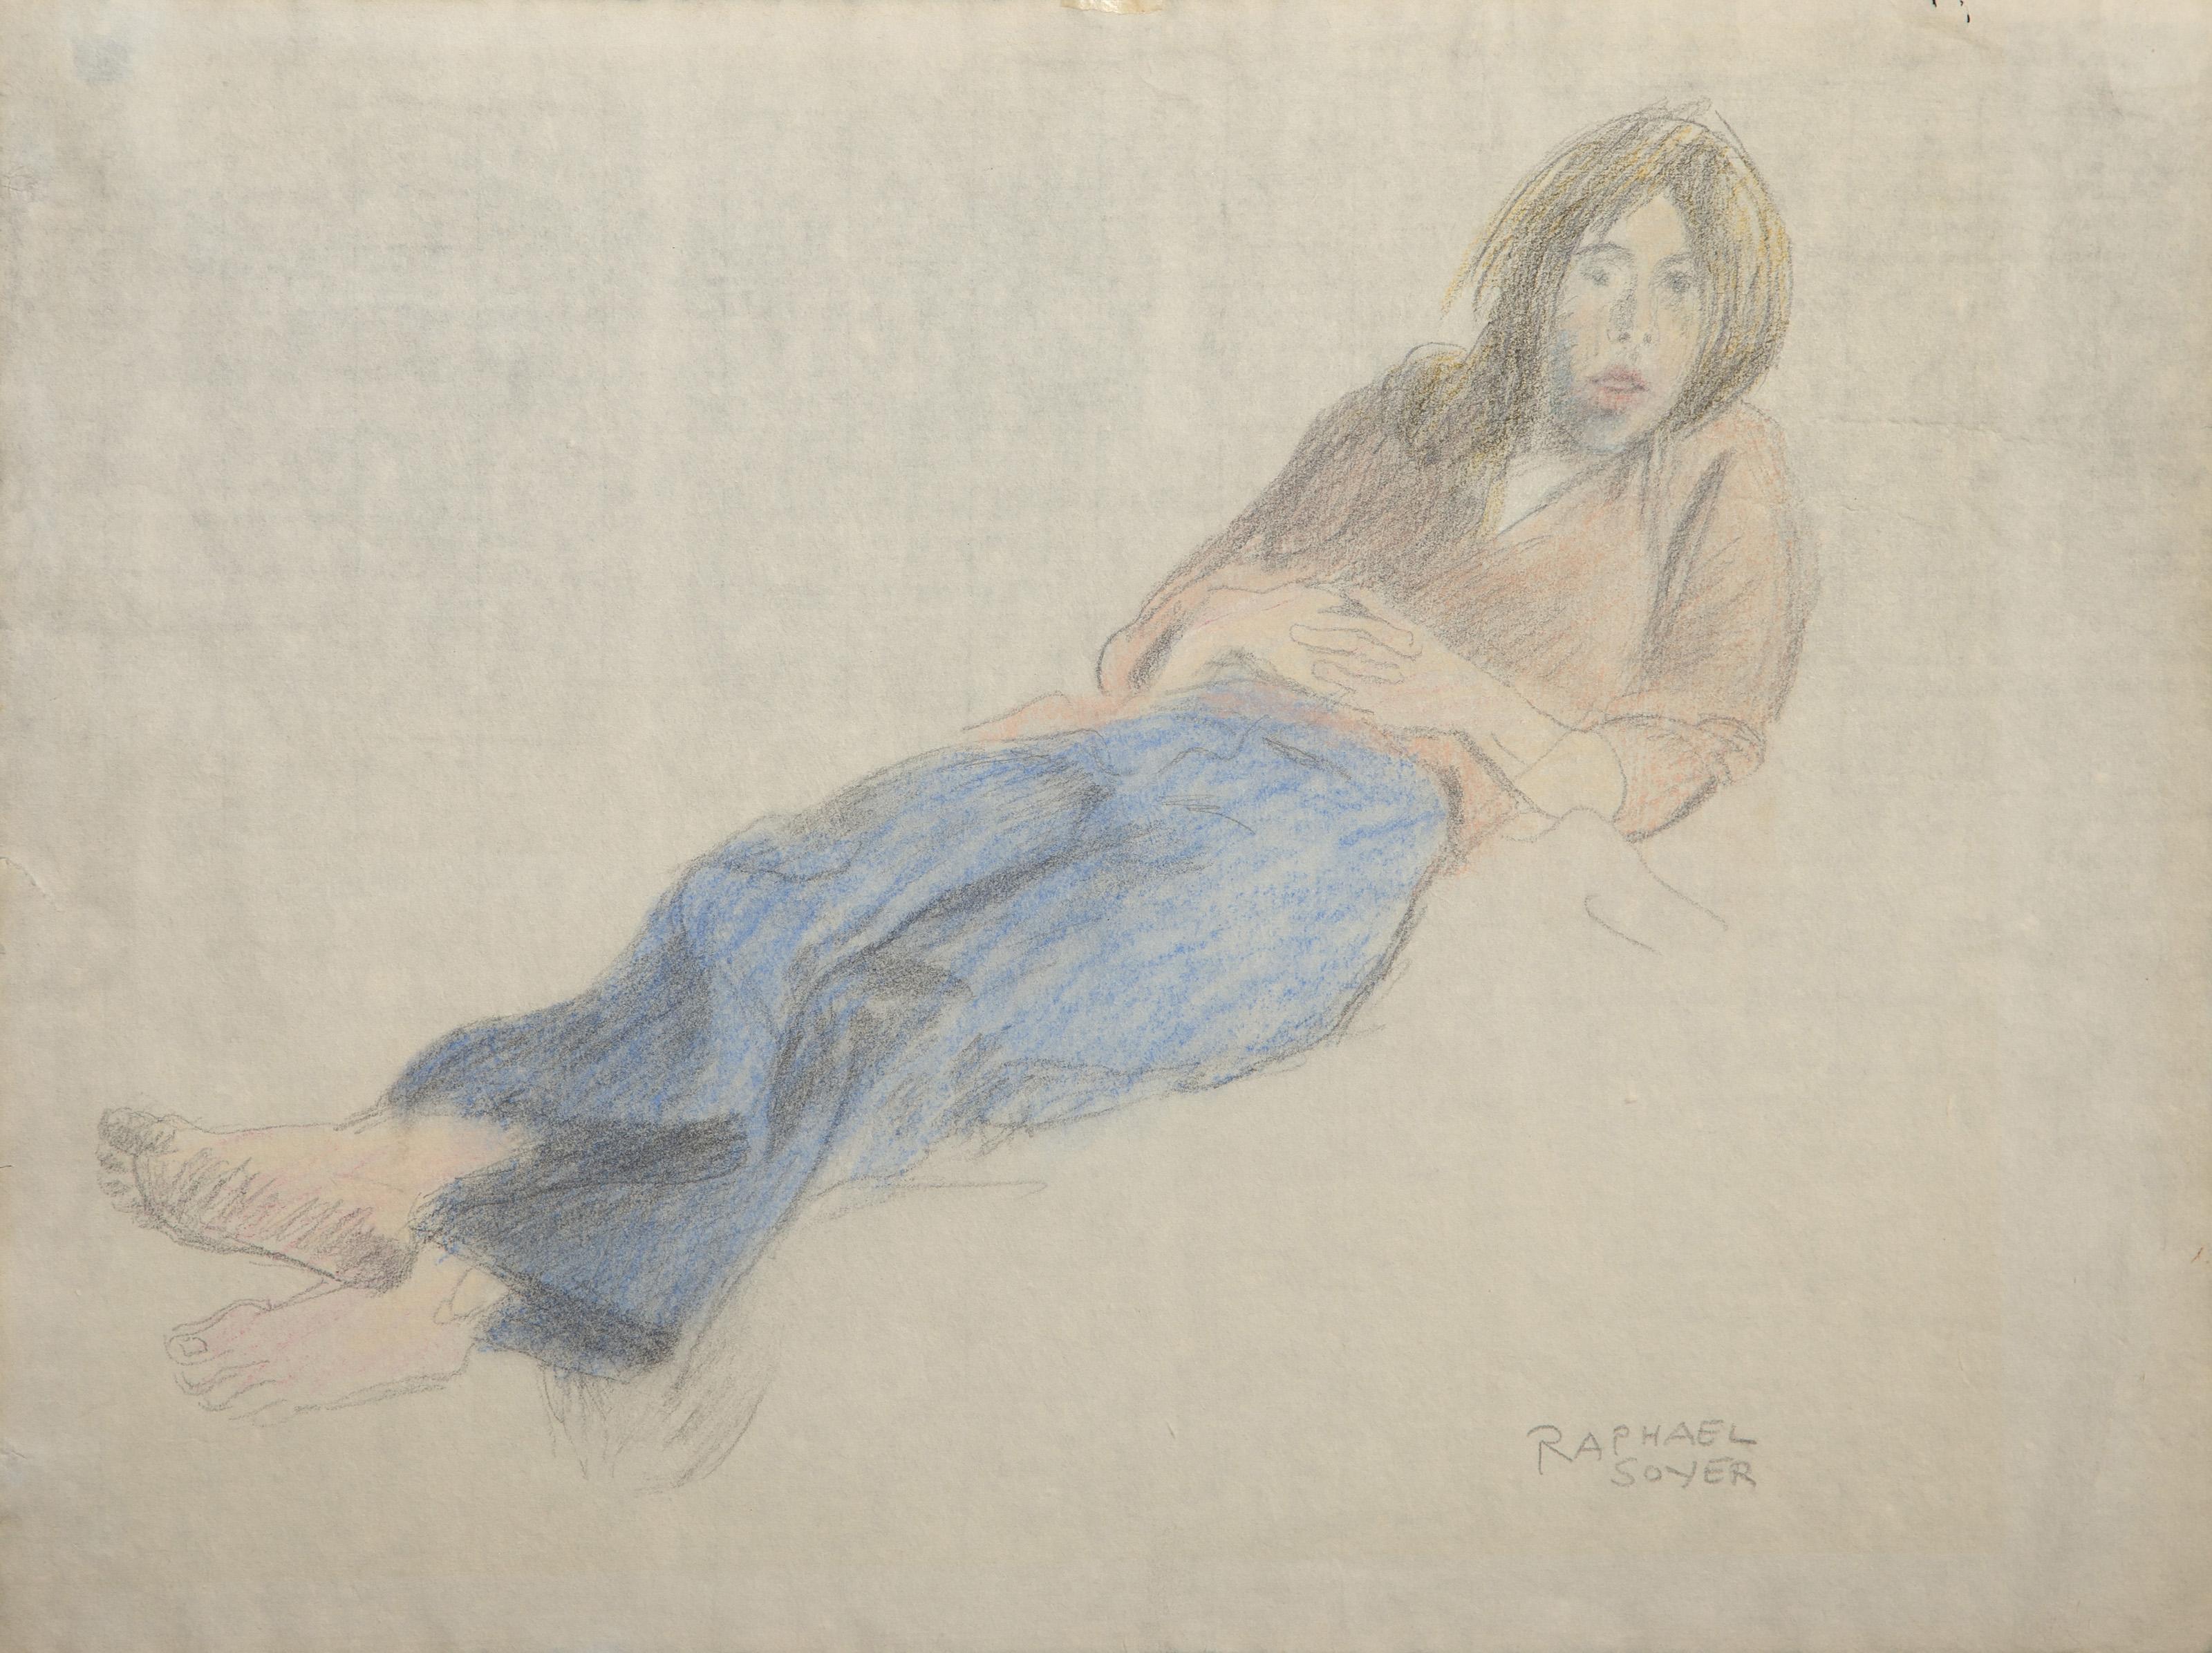 Raphael Soyer, Russian/American (1899 - 1987) -  Lounging Figure. Medium: Graphite and Pastel on Paper, signed in pencil, Size: 16.5 x 22 in. (41.91 x 55.88 cm) 